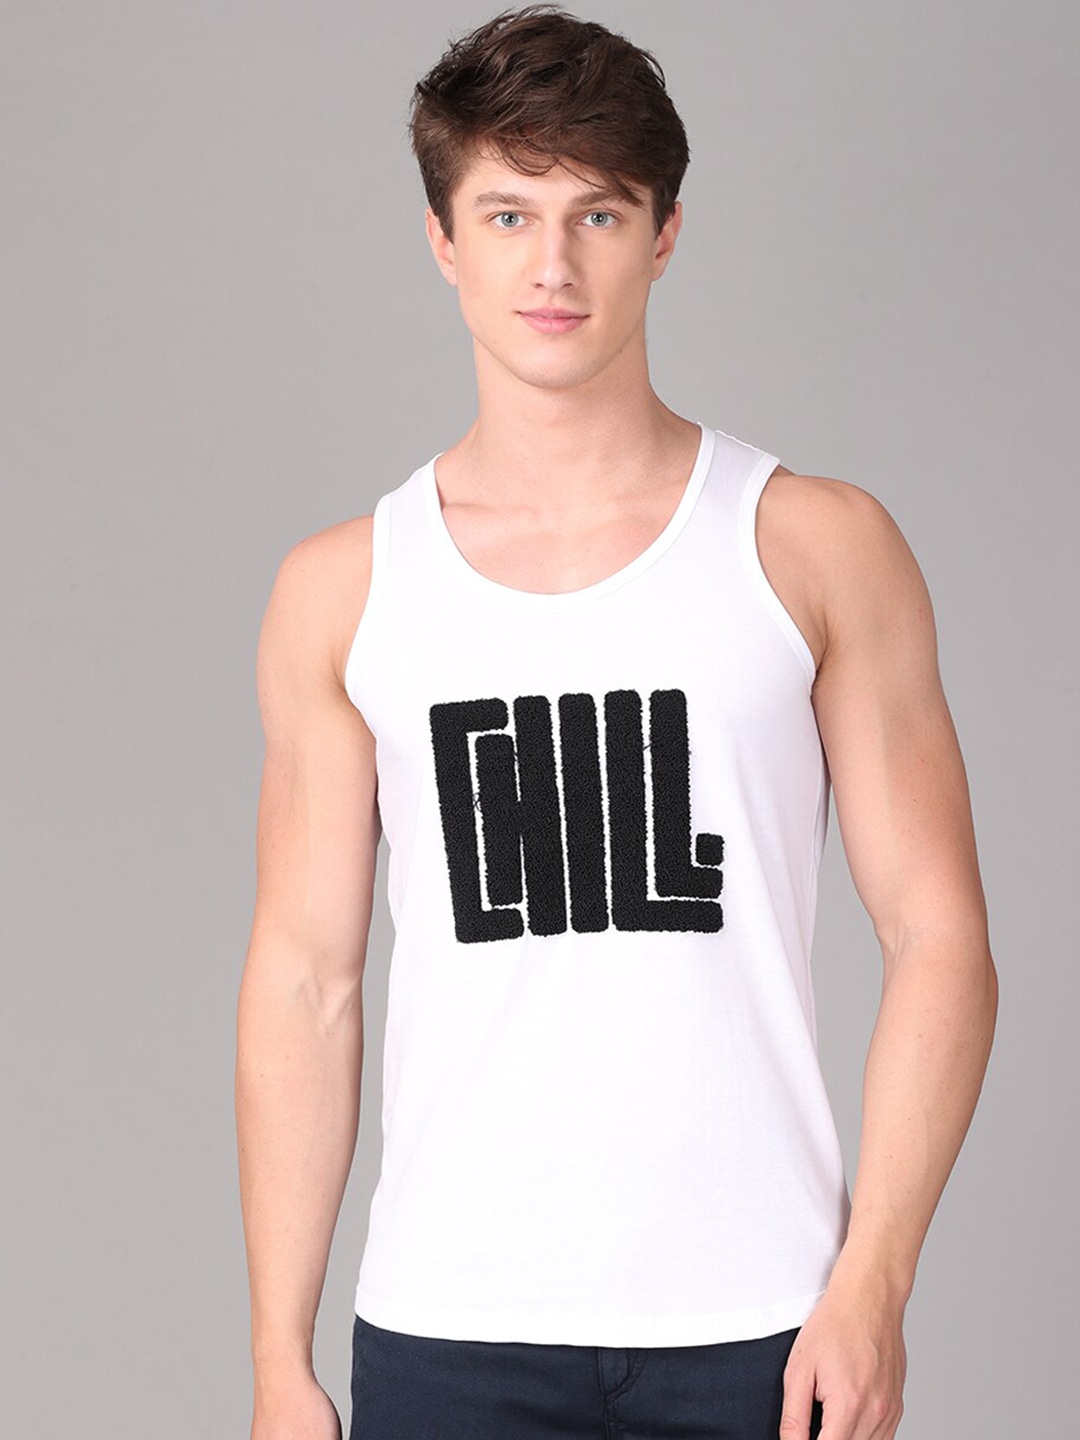 Clothing Innerwear Vests | IMYOUNG Men White & Black Typography Printed Innerwear Vests - BF75005